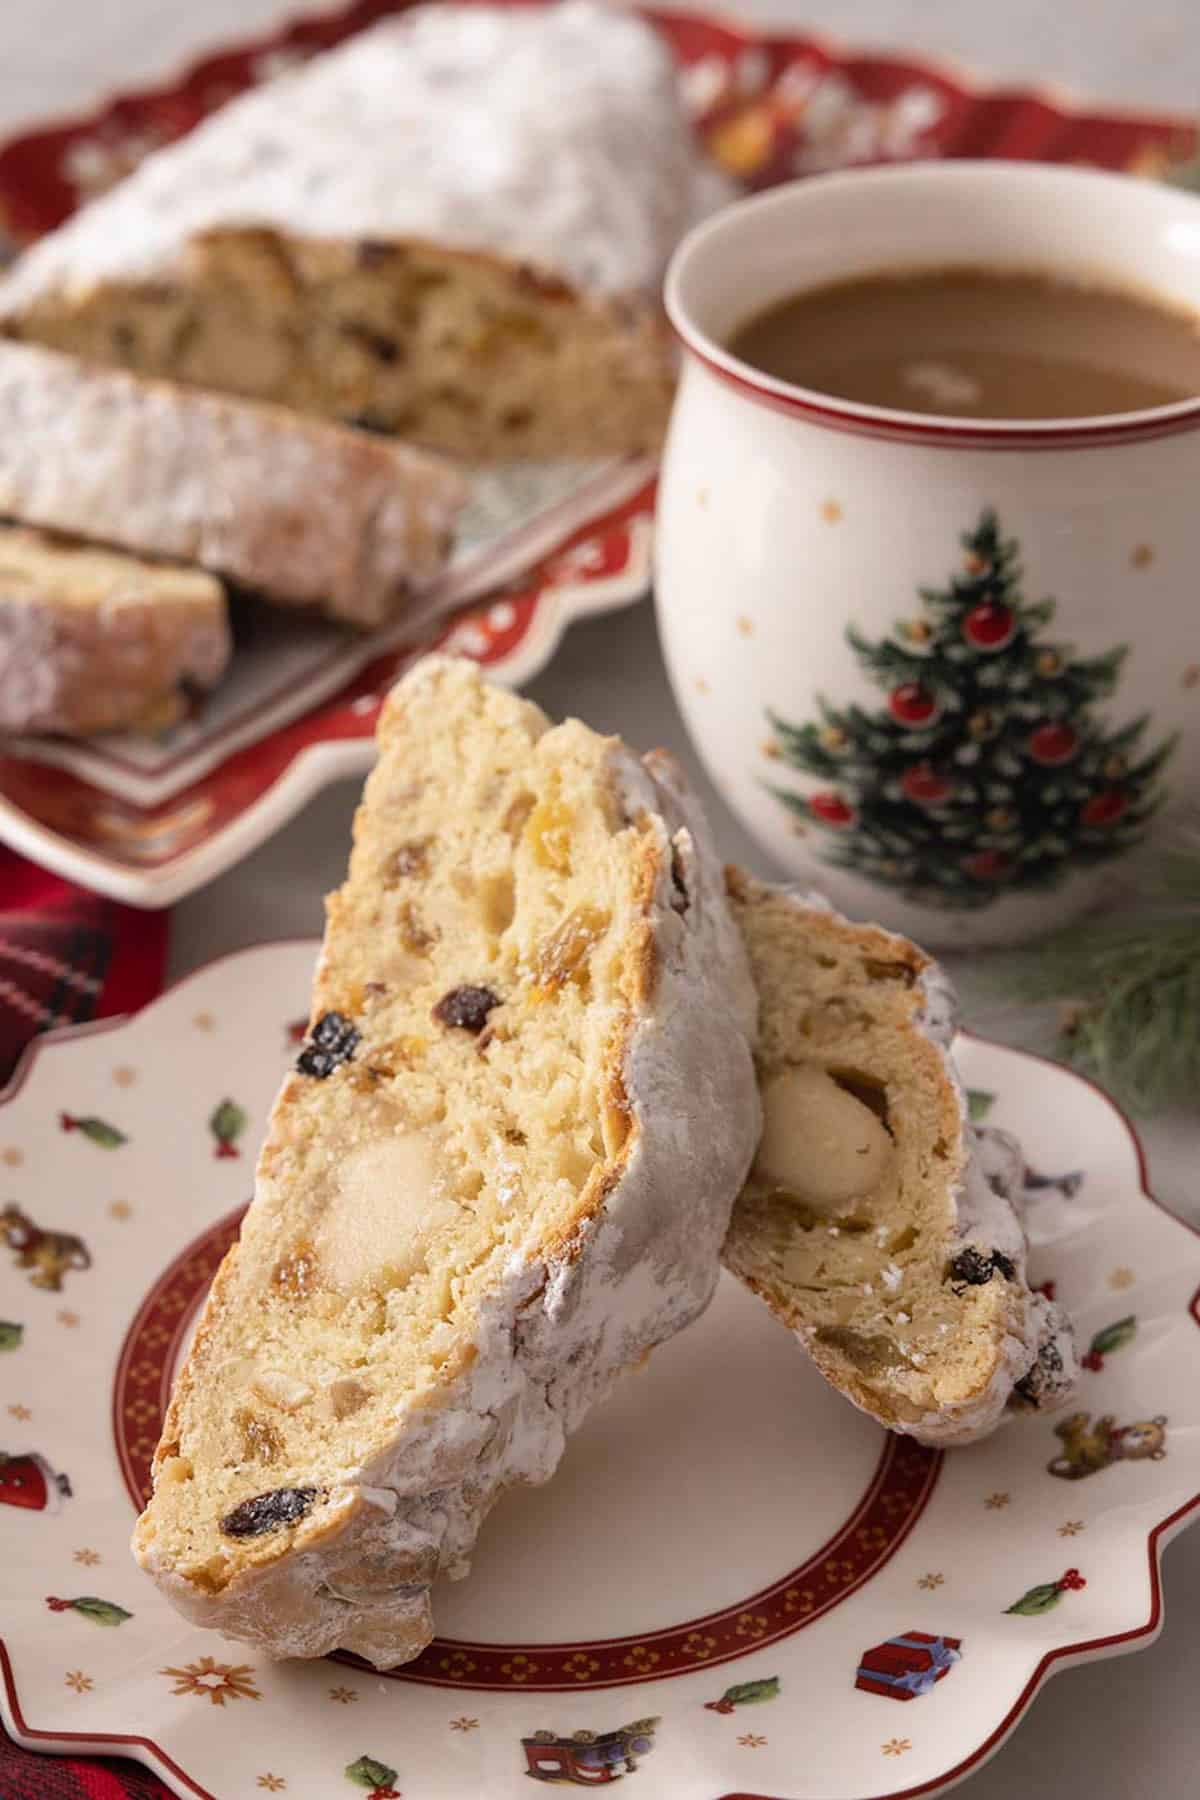 A festive plate with two slices of stollen by a mug of hot chocolate.